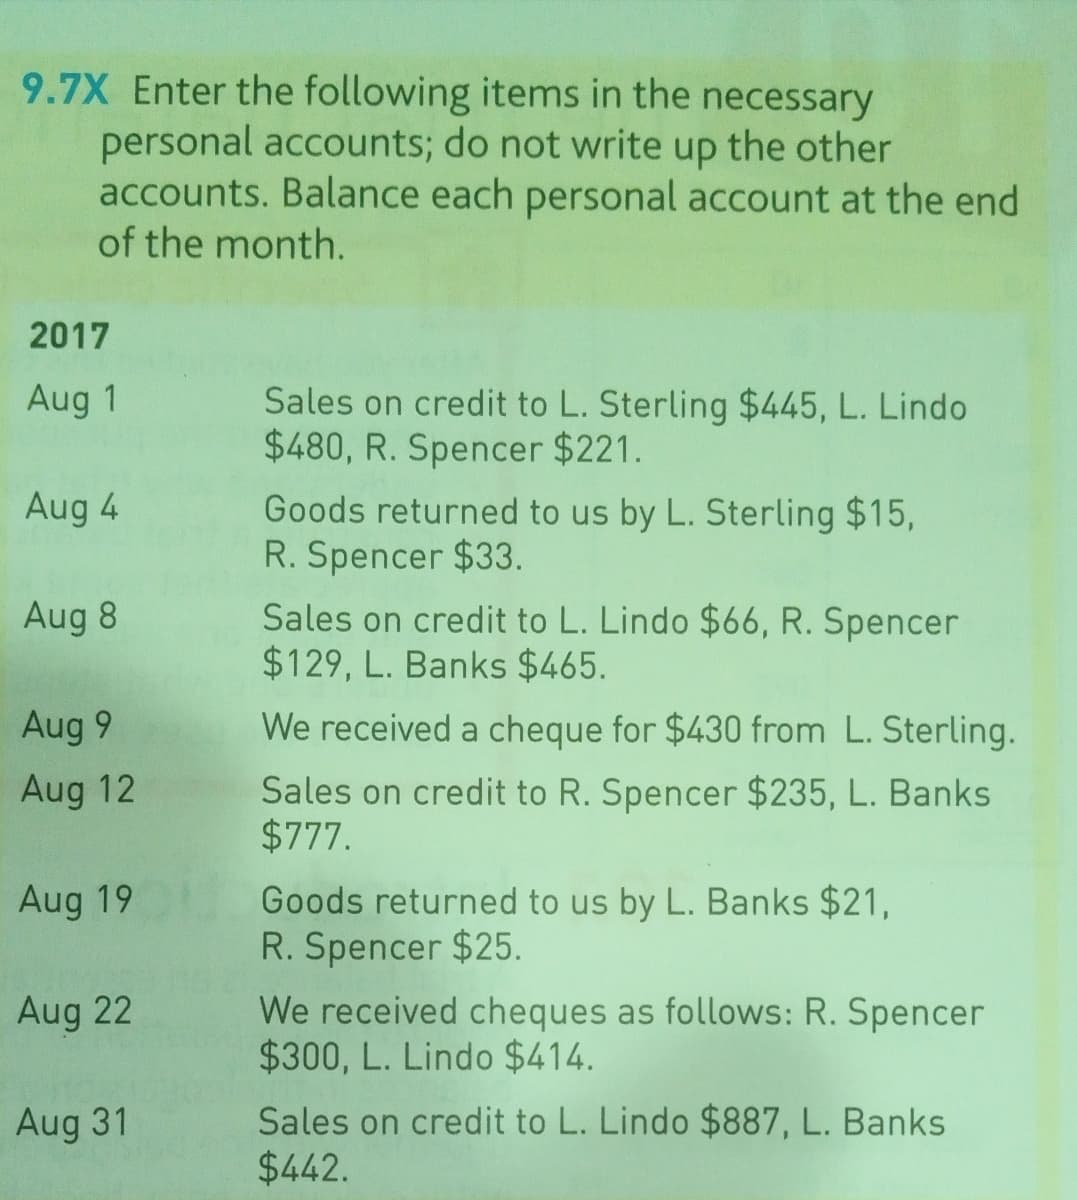 9.7X Enter the following items in the necessary
personal accounts; do not write up the other
accounts. Balance each personal account at the end
of the month.
2017
Sales on credit to L. Sterling $445, L. Lindo
$480, R. Spencer $221.
Aug 1
Goods returned to us by L. Sterling $15,
R. Spencer $33.
Aug 4
Sales on credit to L. Lindo $66, R. Spencer
$129, L. Banks $465.
Aug 8
Aug 9
We received a cheque for $430 from L. Sterling.
Sales on credit to R. Spencer $235, L. Banks
$777.
Aug 12
Goods returned to us by L. Banks $21,
R. Spencer $25.
Aug 19
We received cheques as follows: R. Spencer
$300, L. Lindo $414.
Aug 22
Sales on credit to L. Lindo $887, L. Banks
$442.
Aug 31
